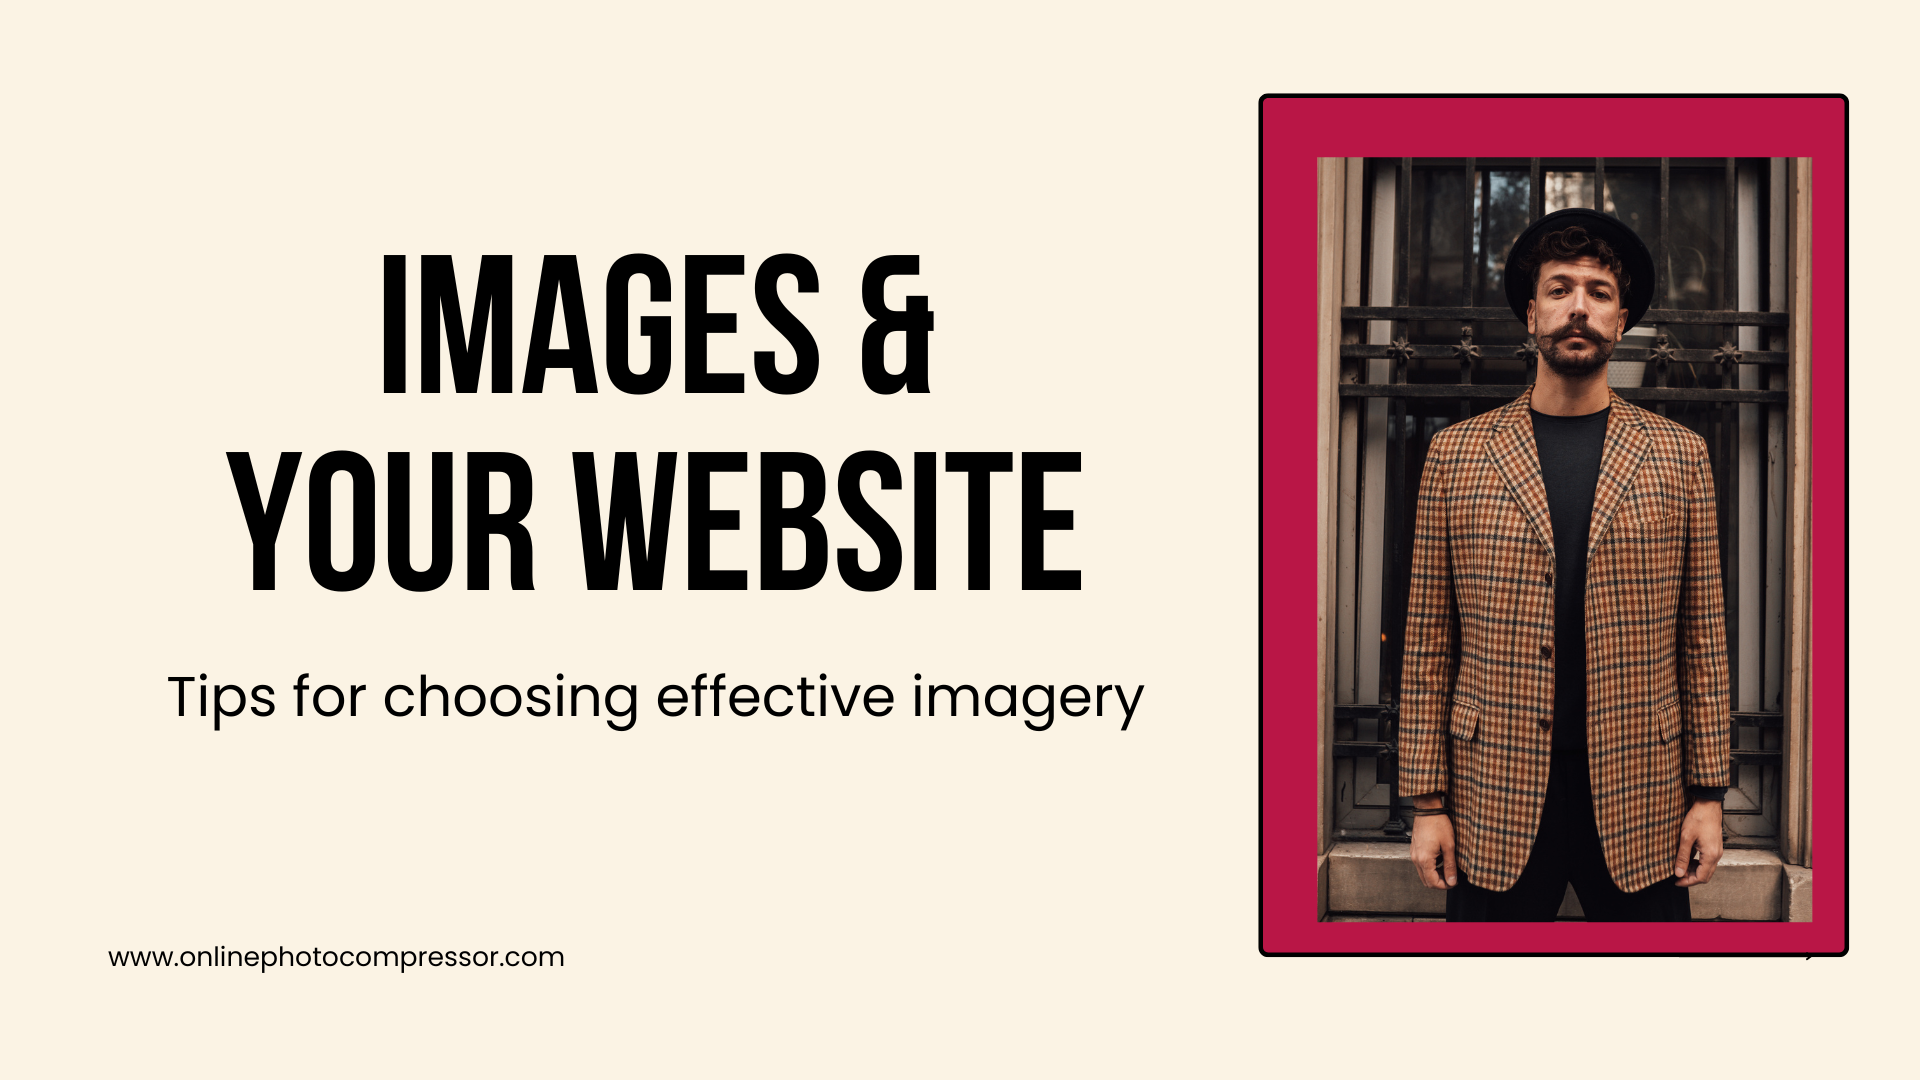 Images and your website: Tips for choosing effective imagery